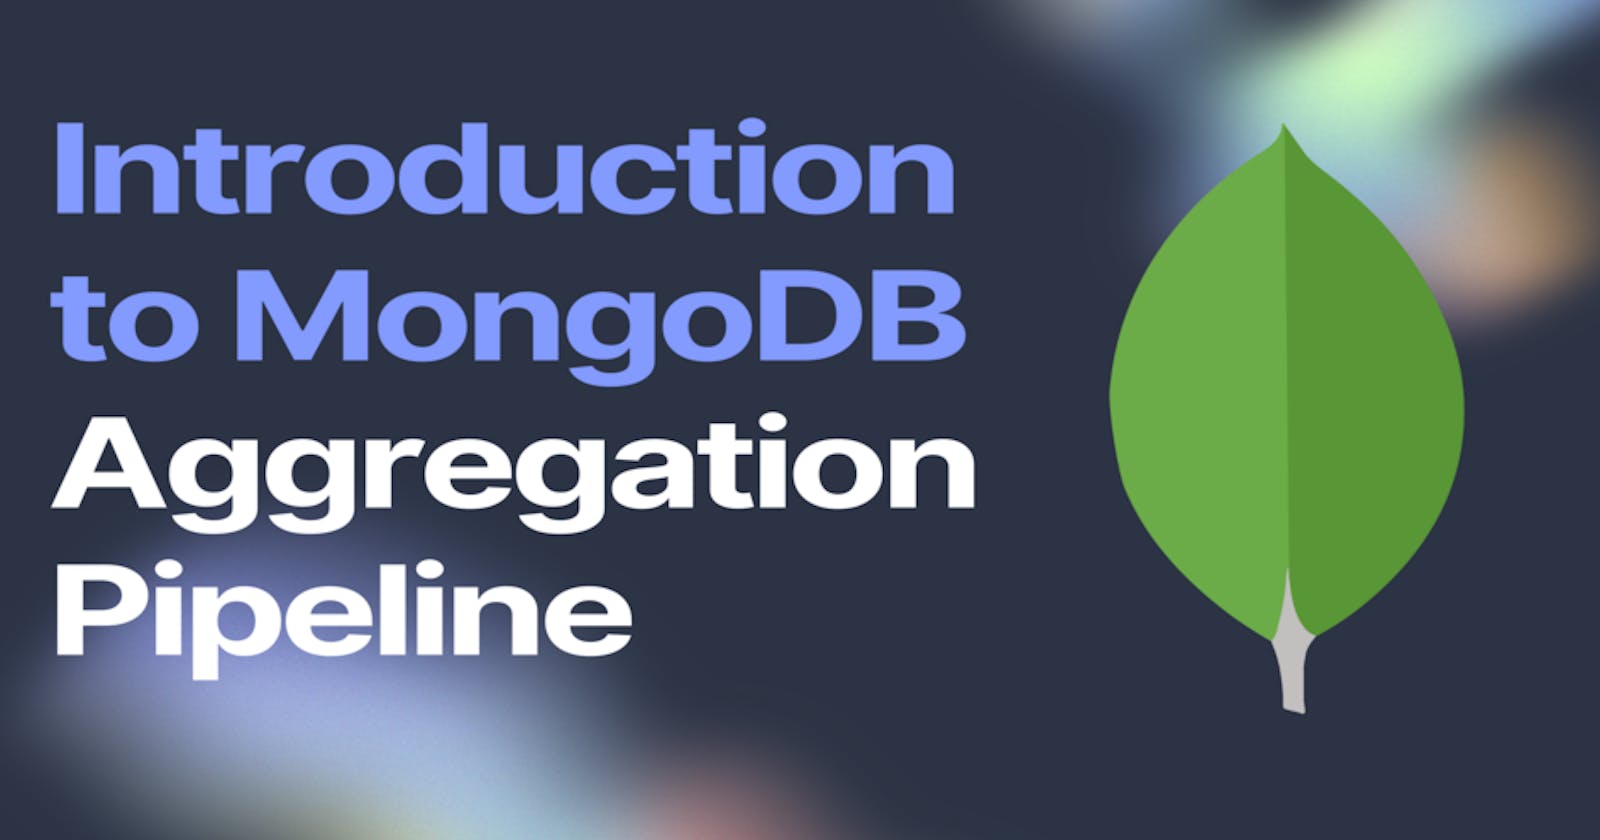 Introduction to MongoDB Aggregation Pipeline